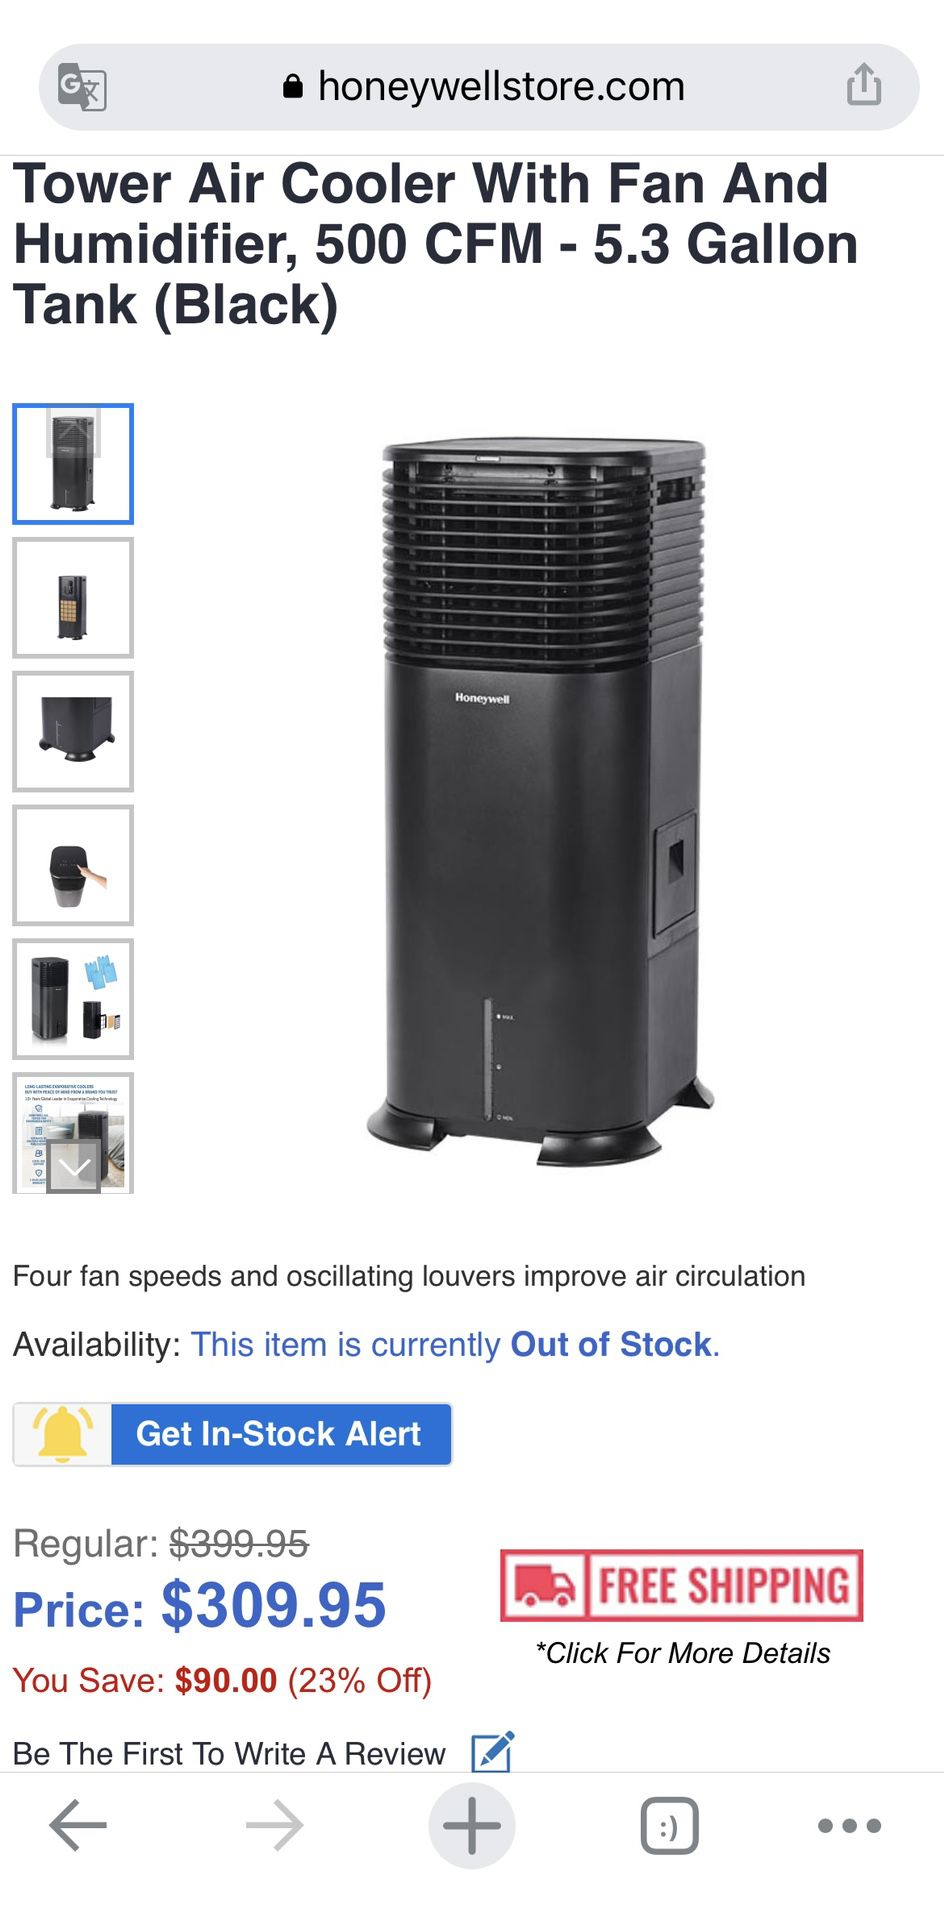 Honeywell DLC203AE Evaporative Tower Air Cooler With Fan And Humidifier, 500 CFM - 5.3 Gallon Tank (Black),